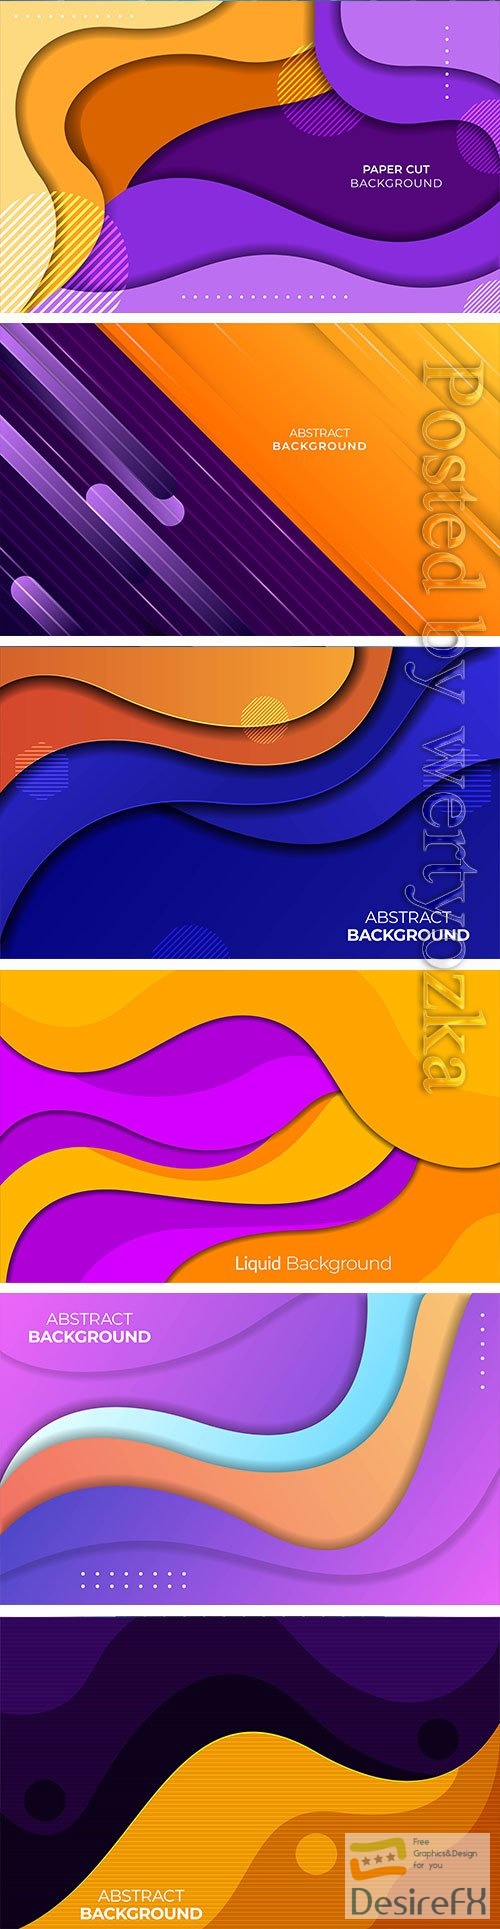 Colorful banner with abstract paper cut waves